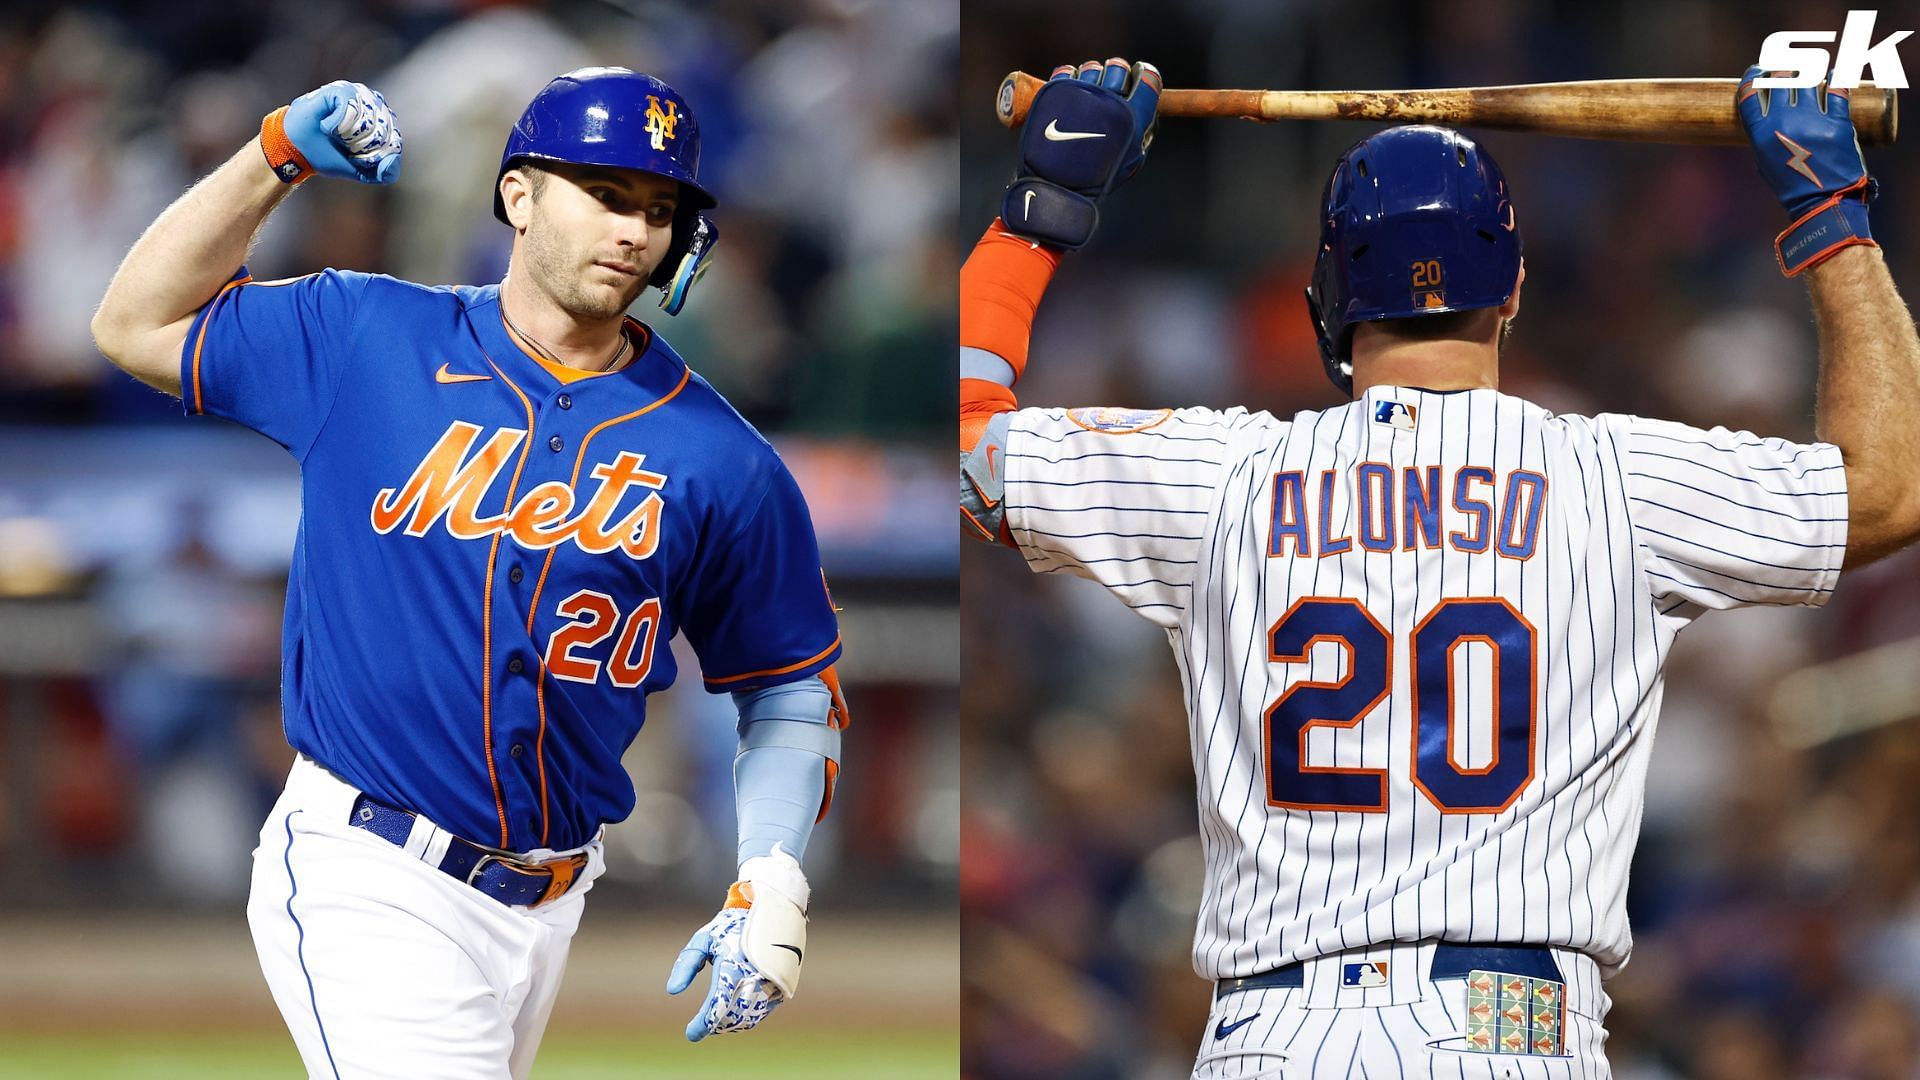 Pete Alonso of the New York Mets